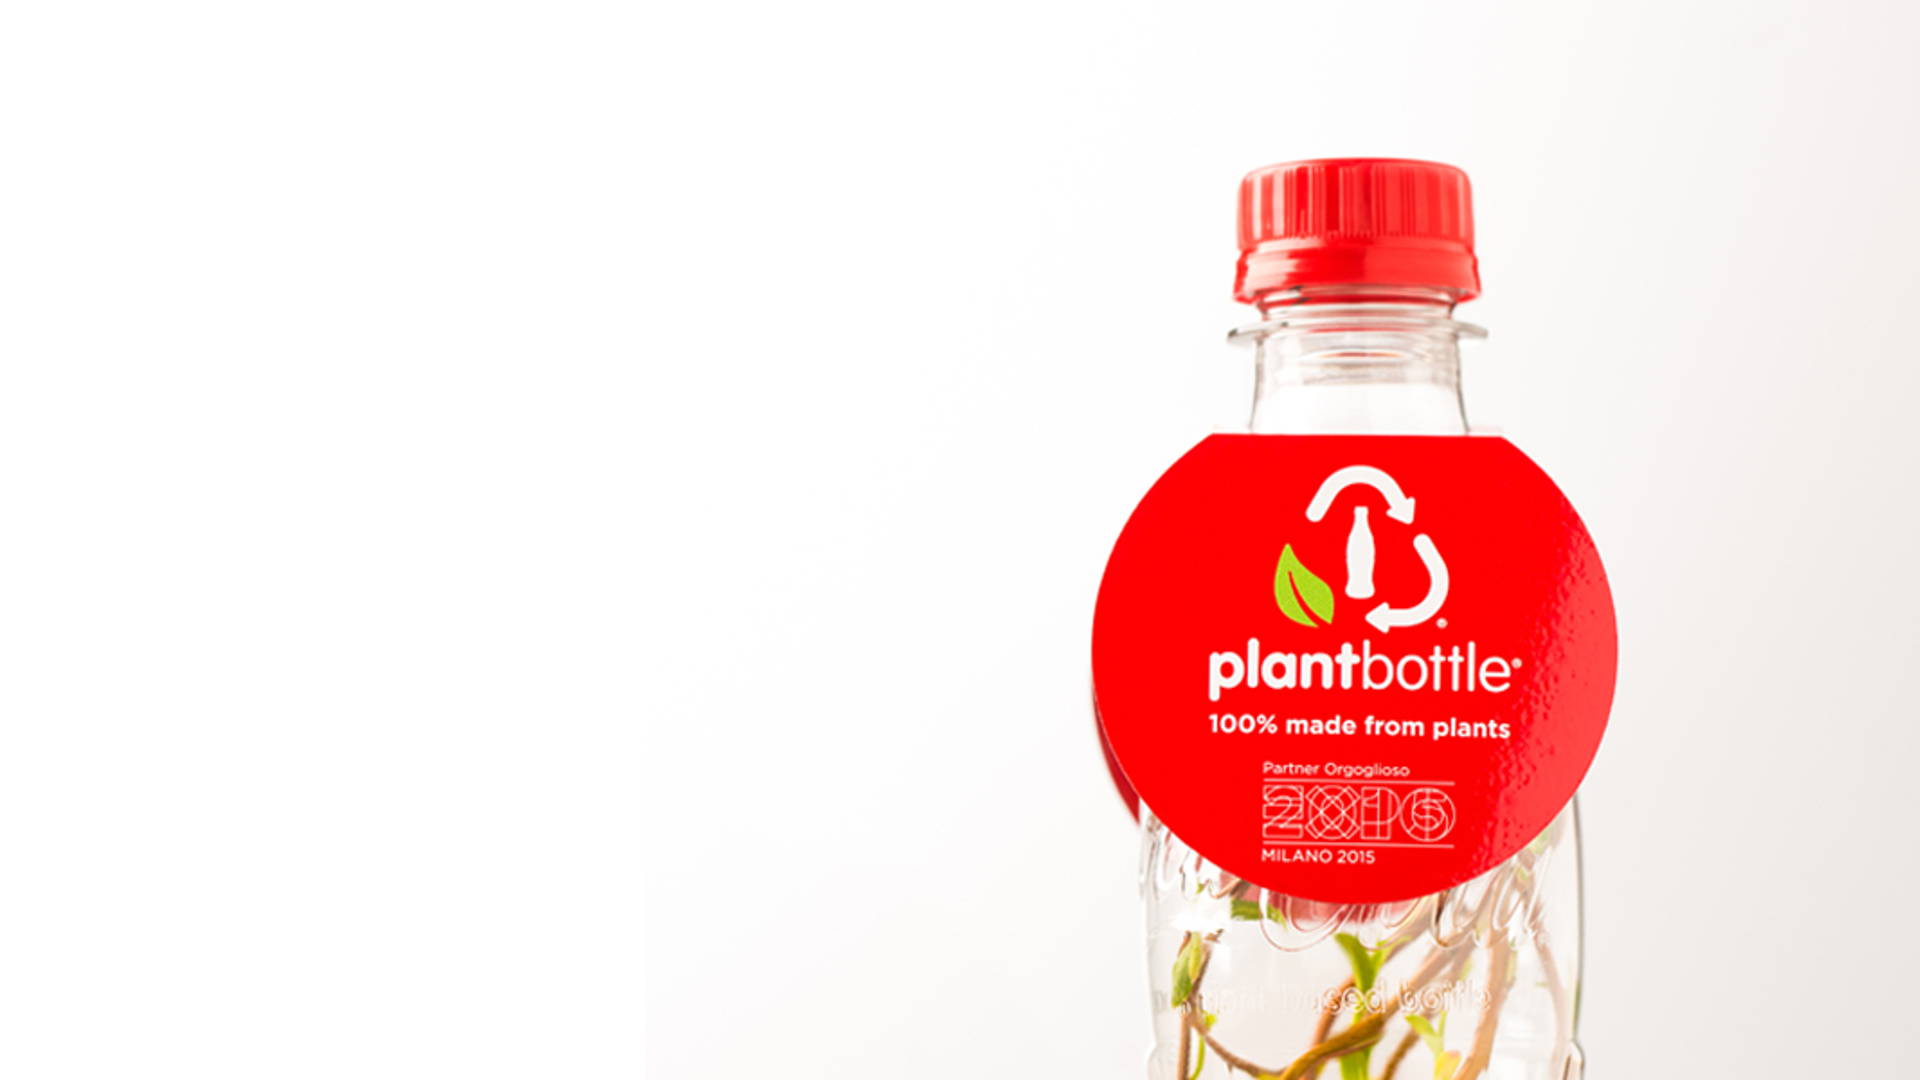 Featured image for Coca-Cola's 100% plant-based bottle